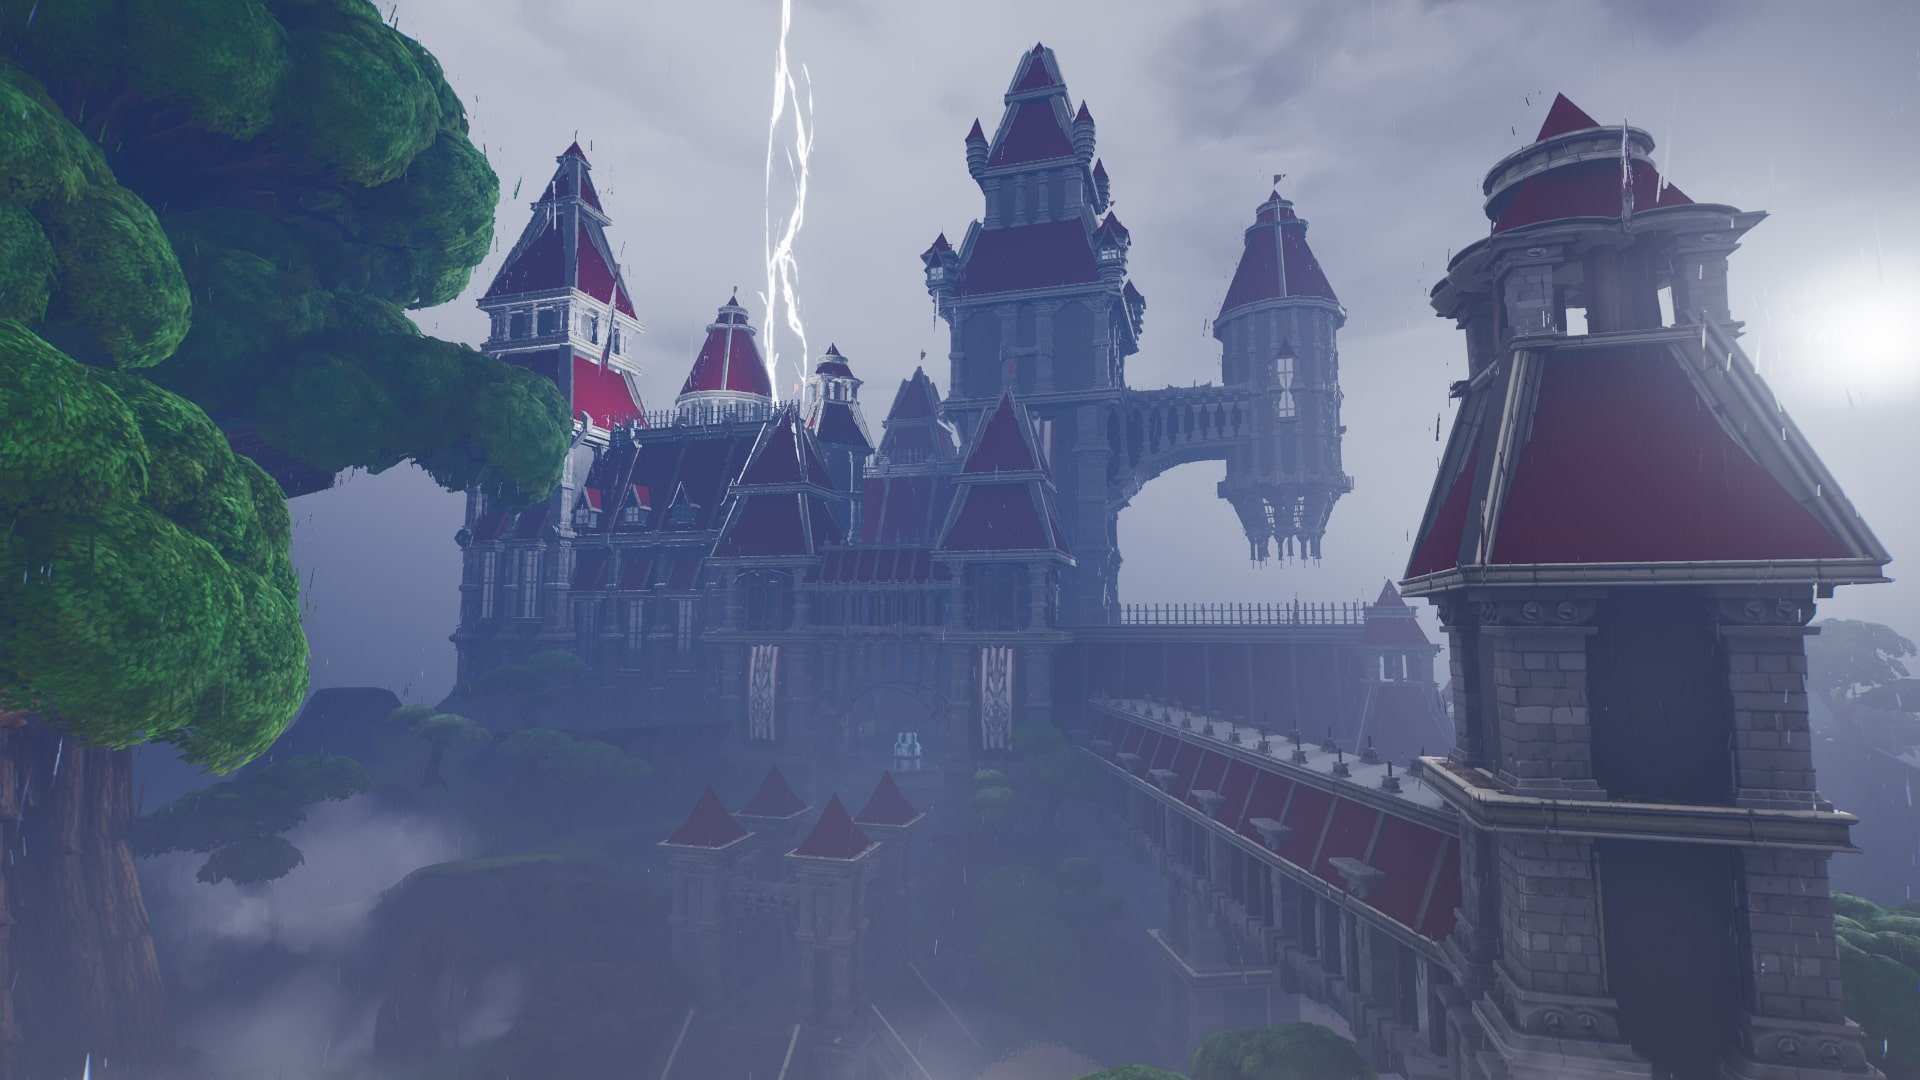 THE PALACE 🏰 - ARTISTIC BUILD